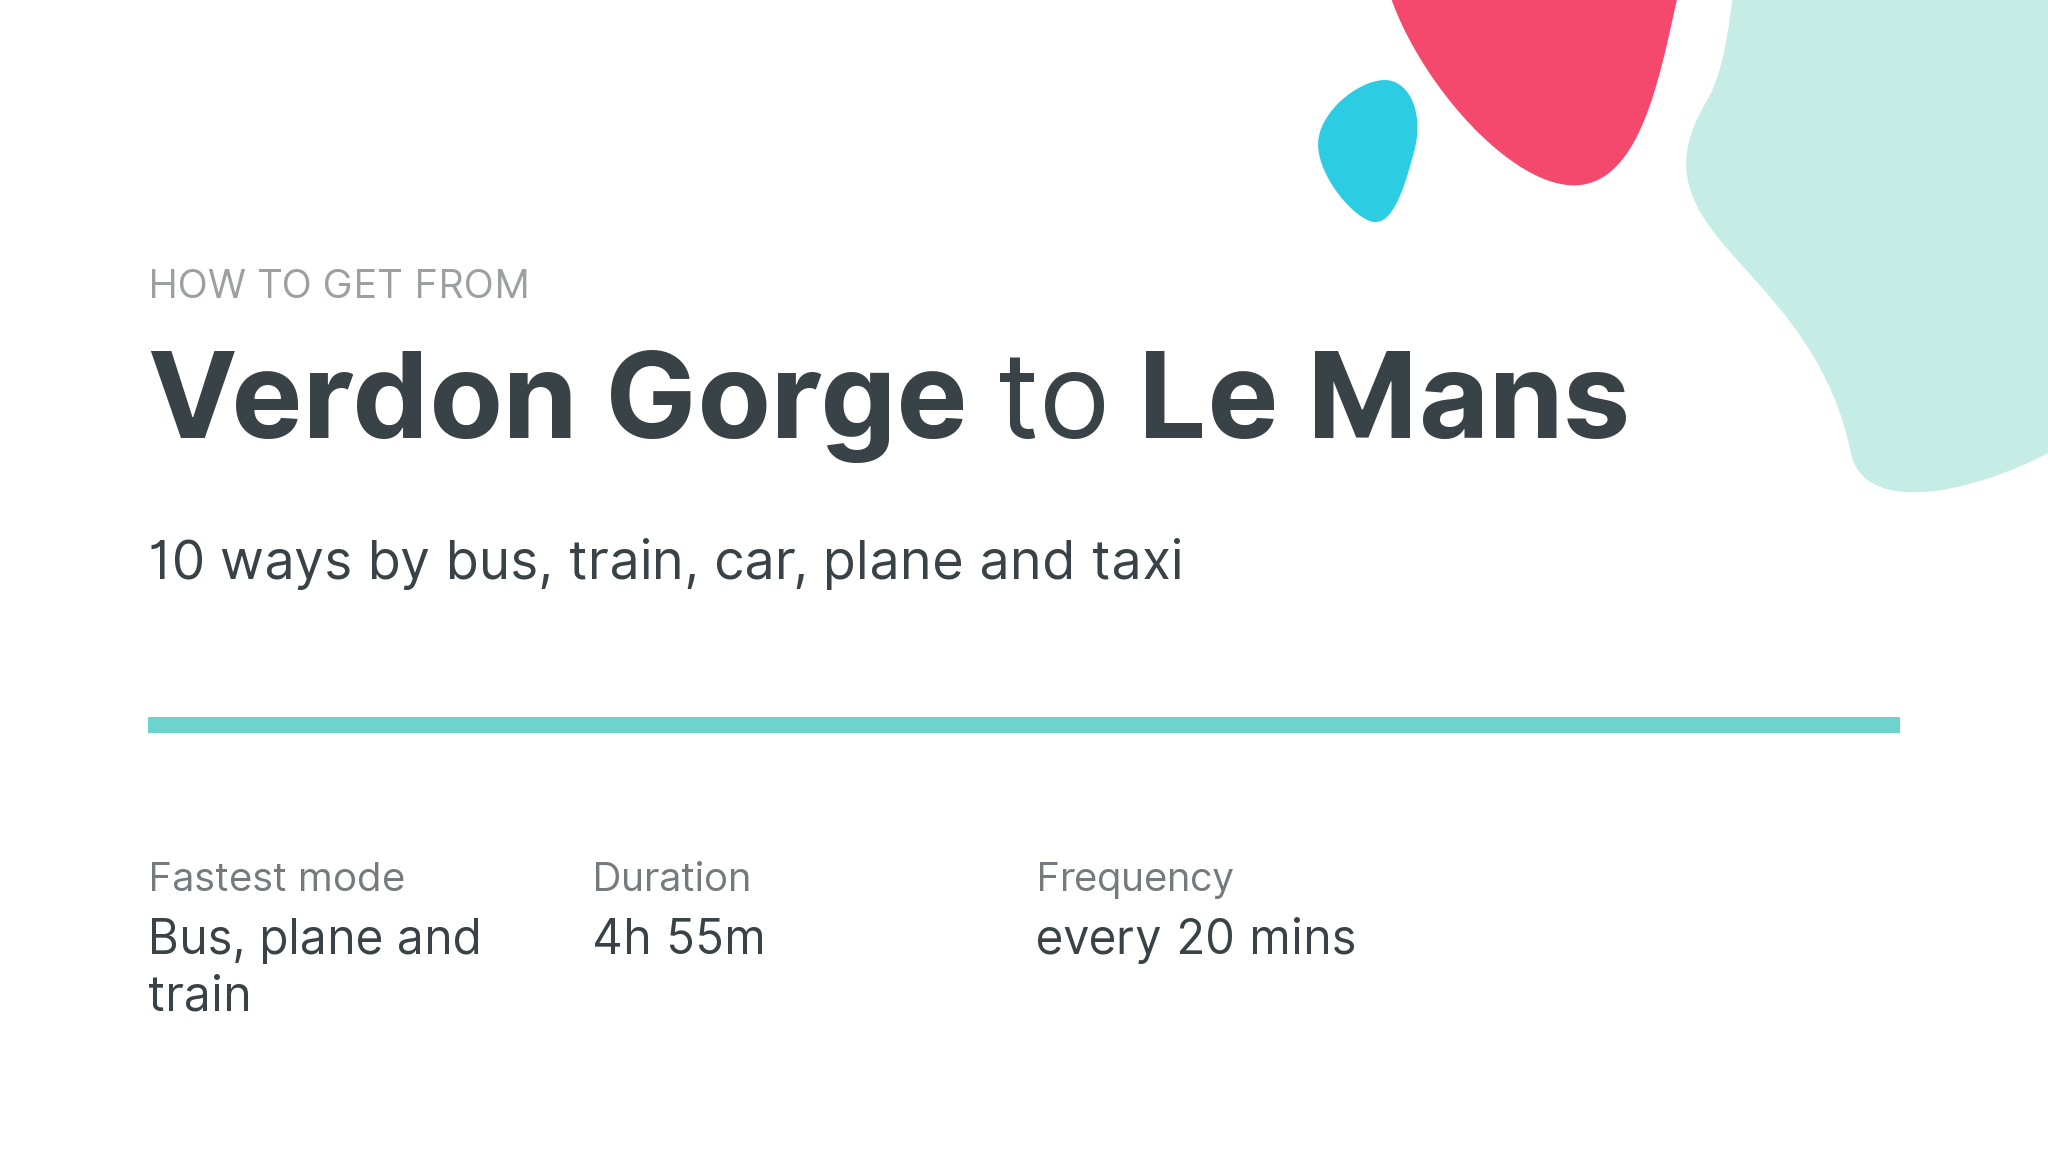 How do I get from Verdon Gorge to Le Mans